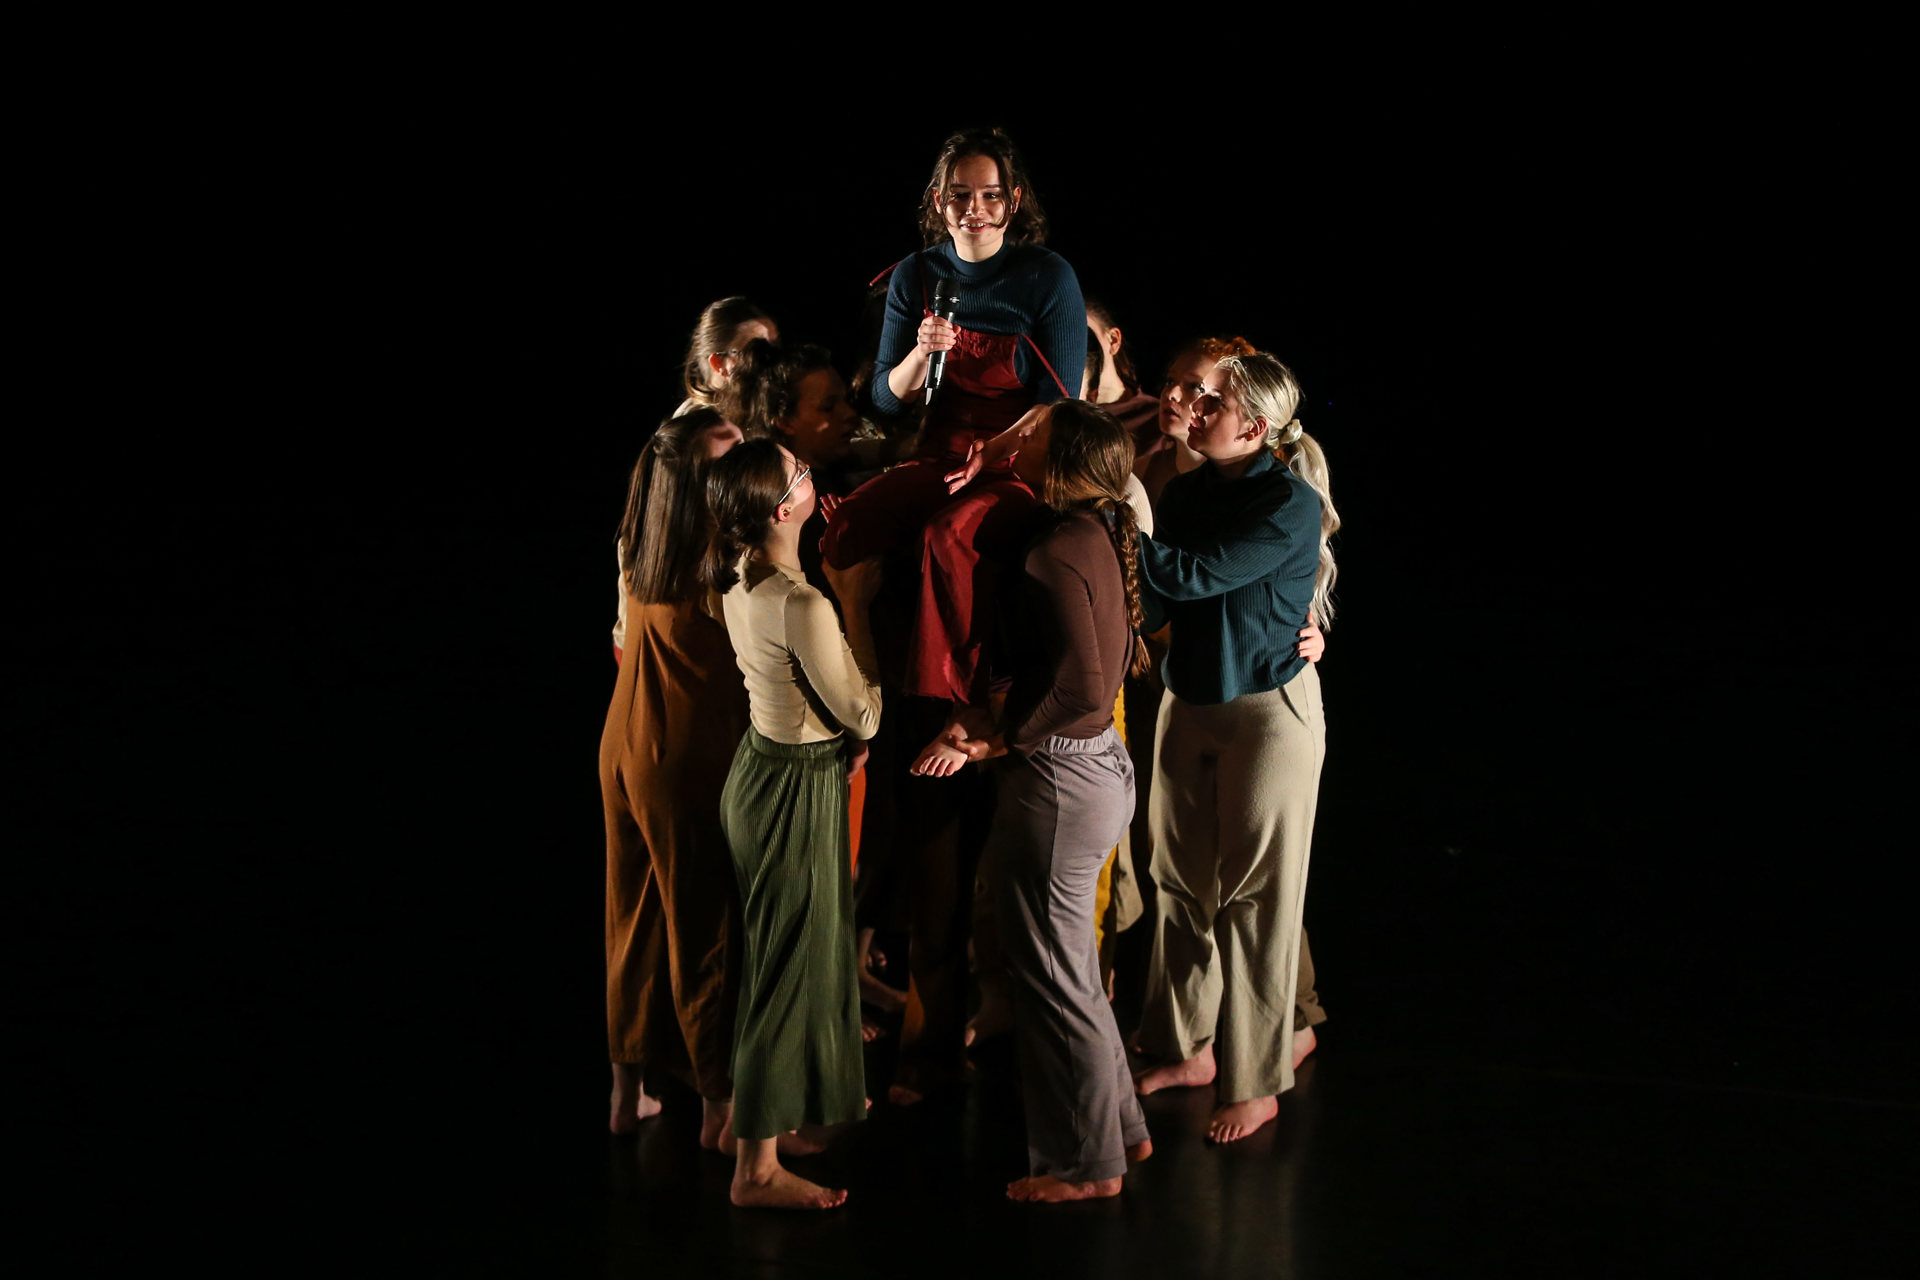 Group of female dancers huddled together lifting one person up in the middle on a dark stage